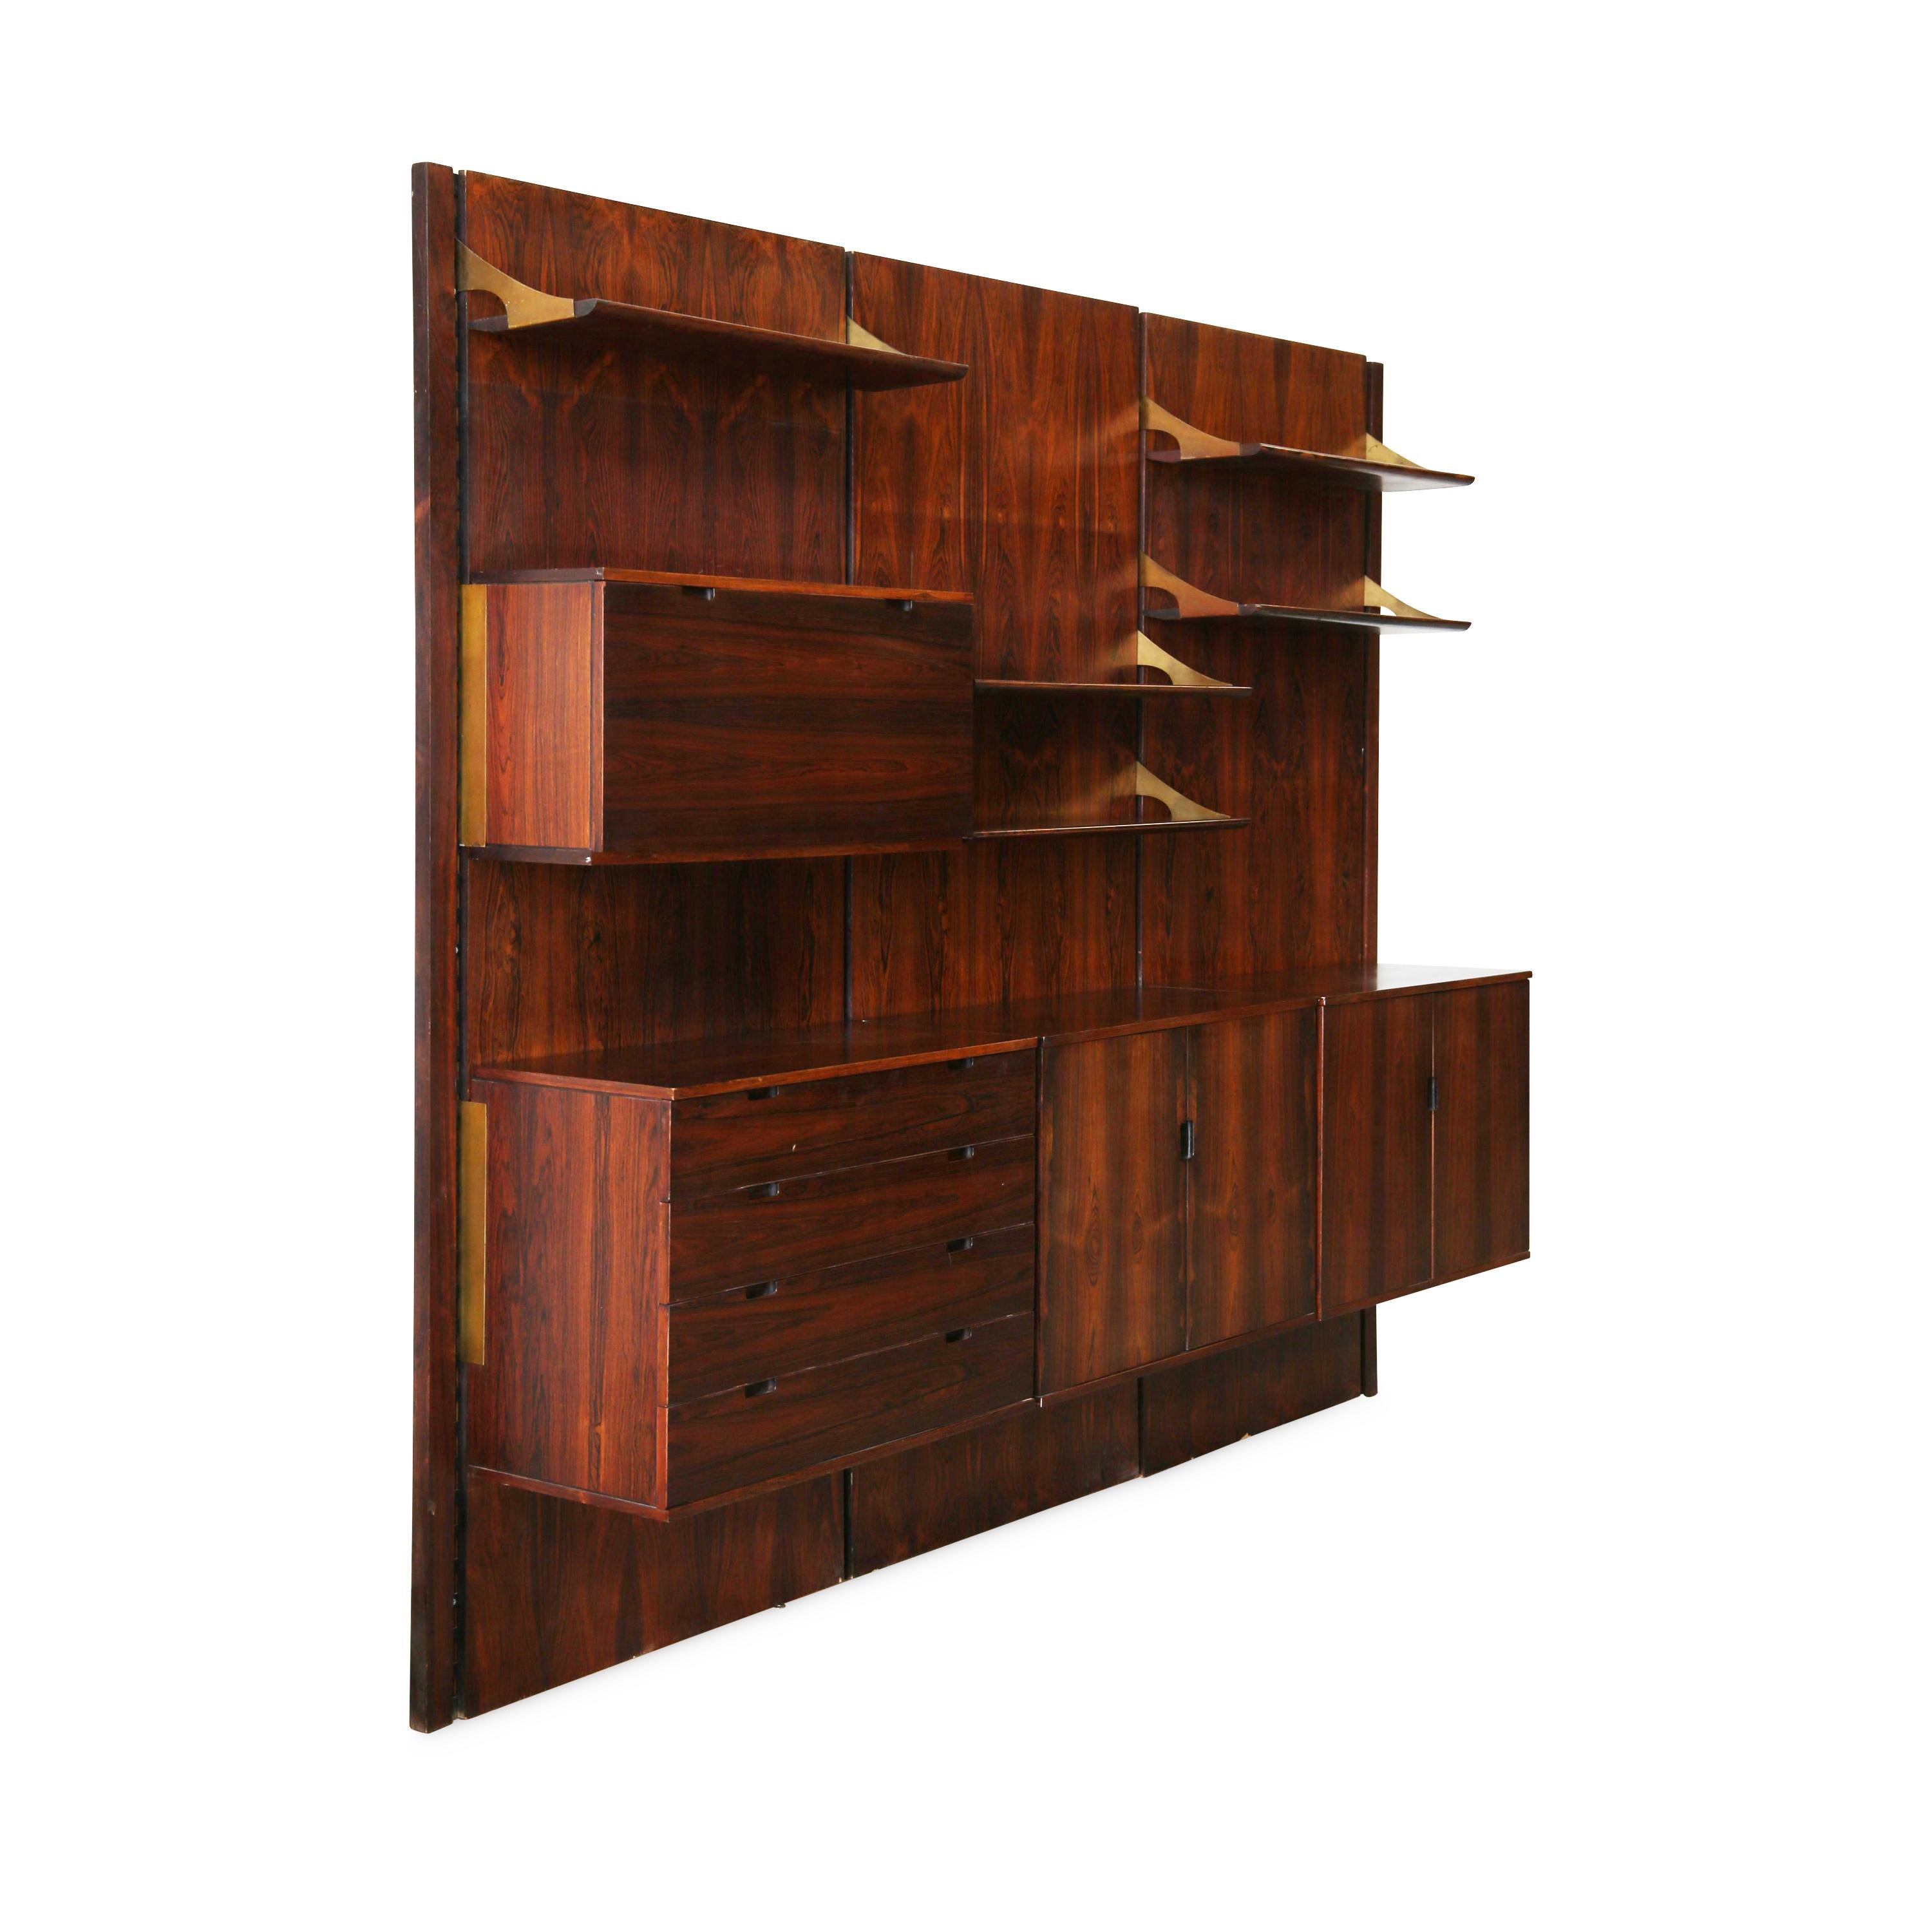 Italian wall bookcase created in the 1960s by Raffaella Crespi and produced by Mobilia.
Uprights in black painted iron, back panels and filing systems in rosewood veneer, anchor hooks in burnished brass and recessed handles.
Five shelves with